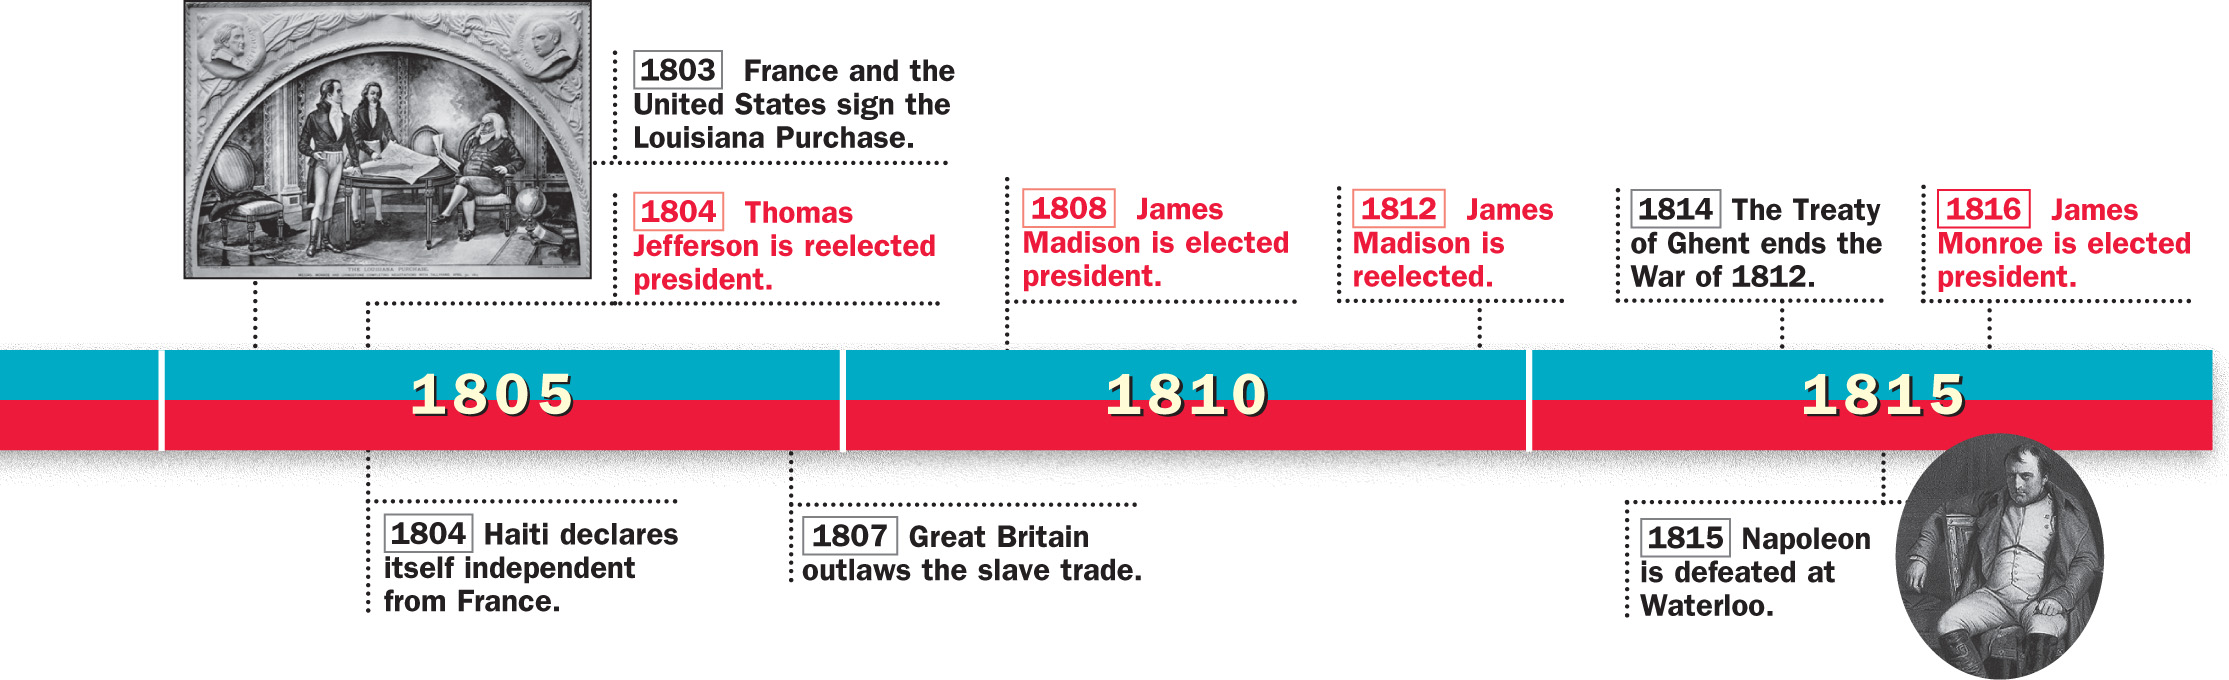 A timeline of historical events from 1789 to 1816 in both the U.S. and the world